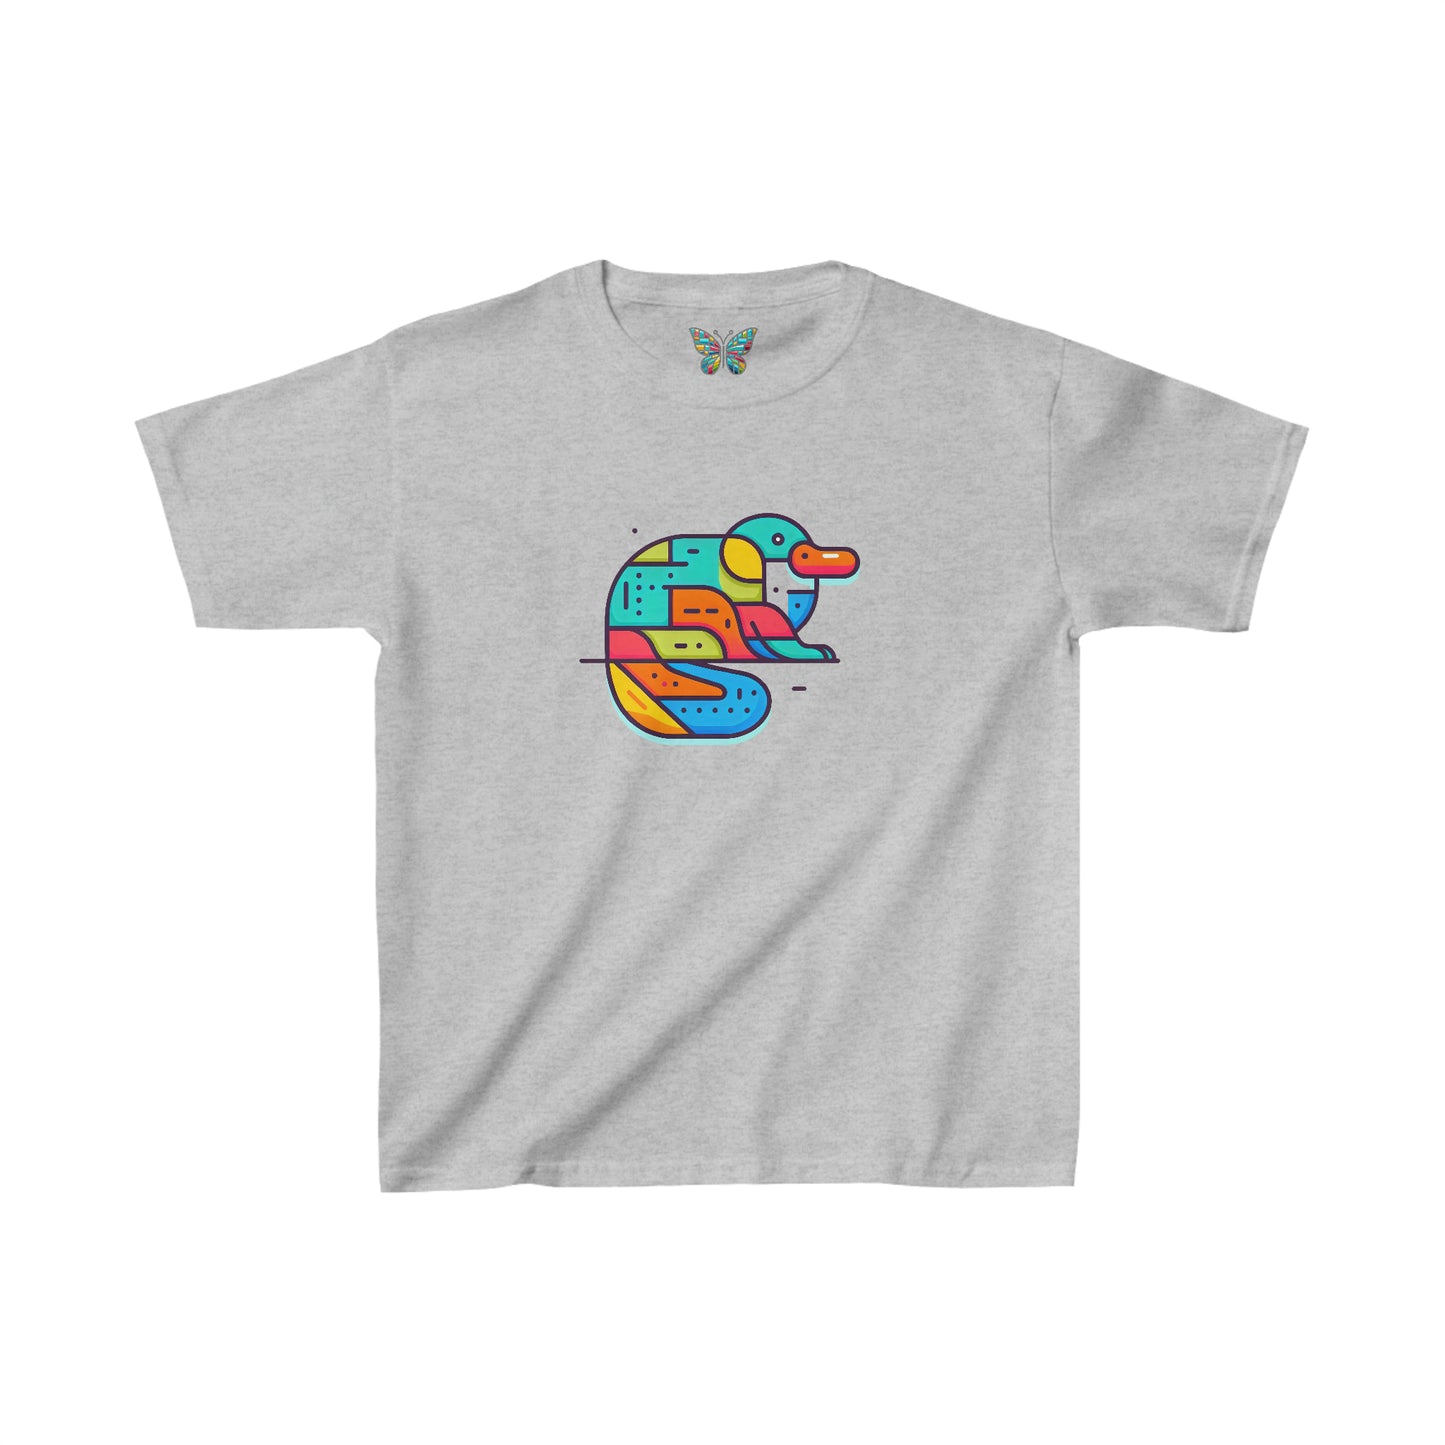 Platypus Plethoscape - Youth - Snazzle Tee